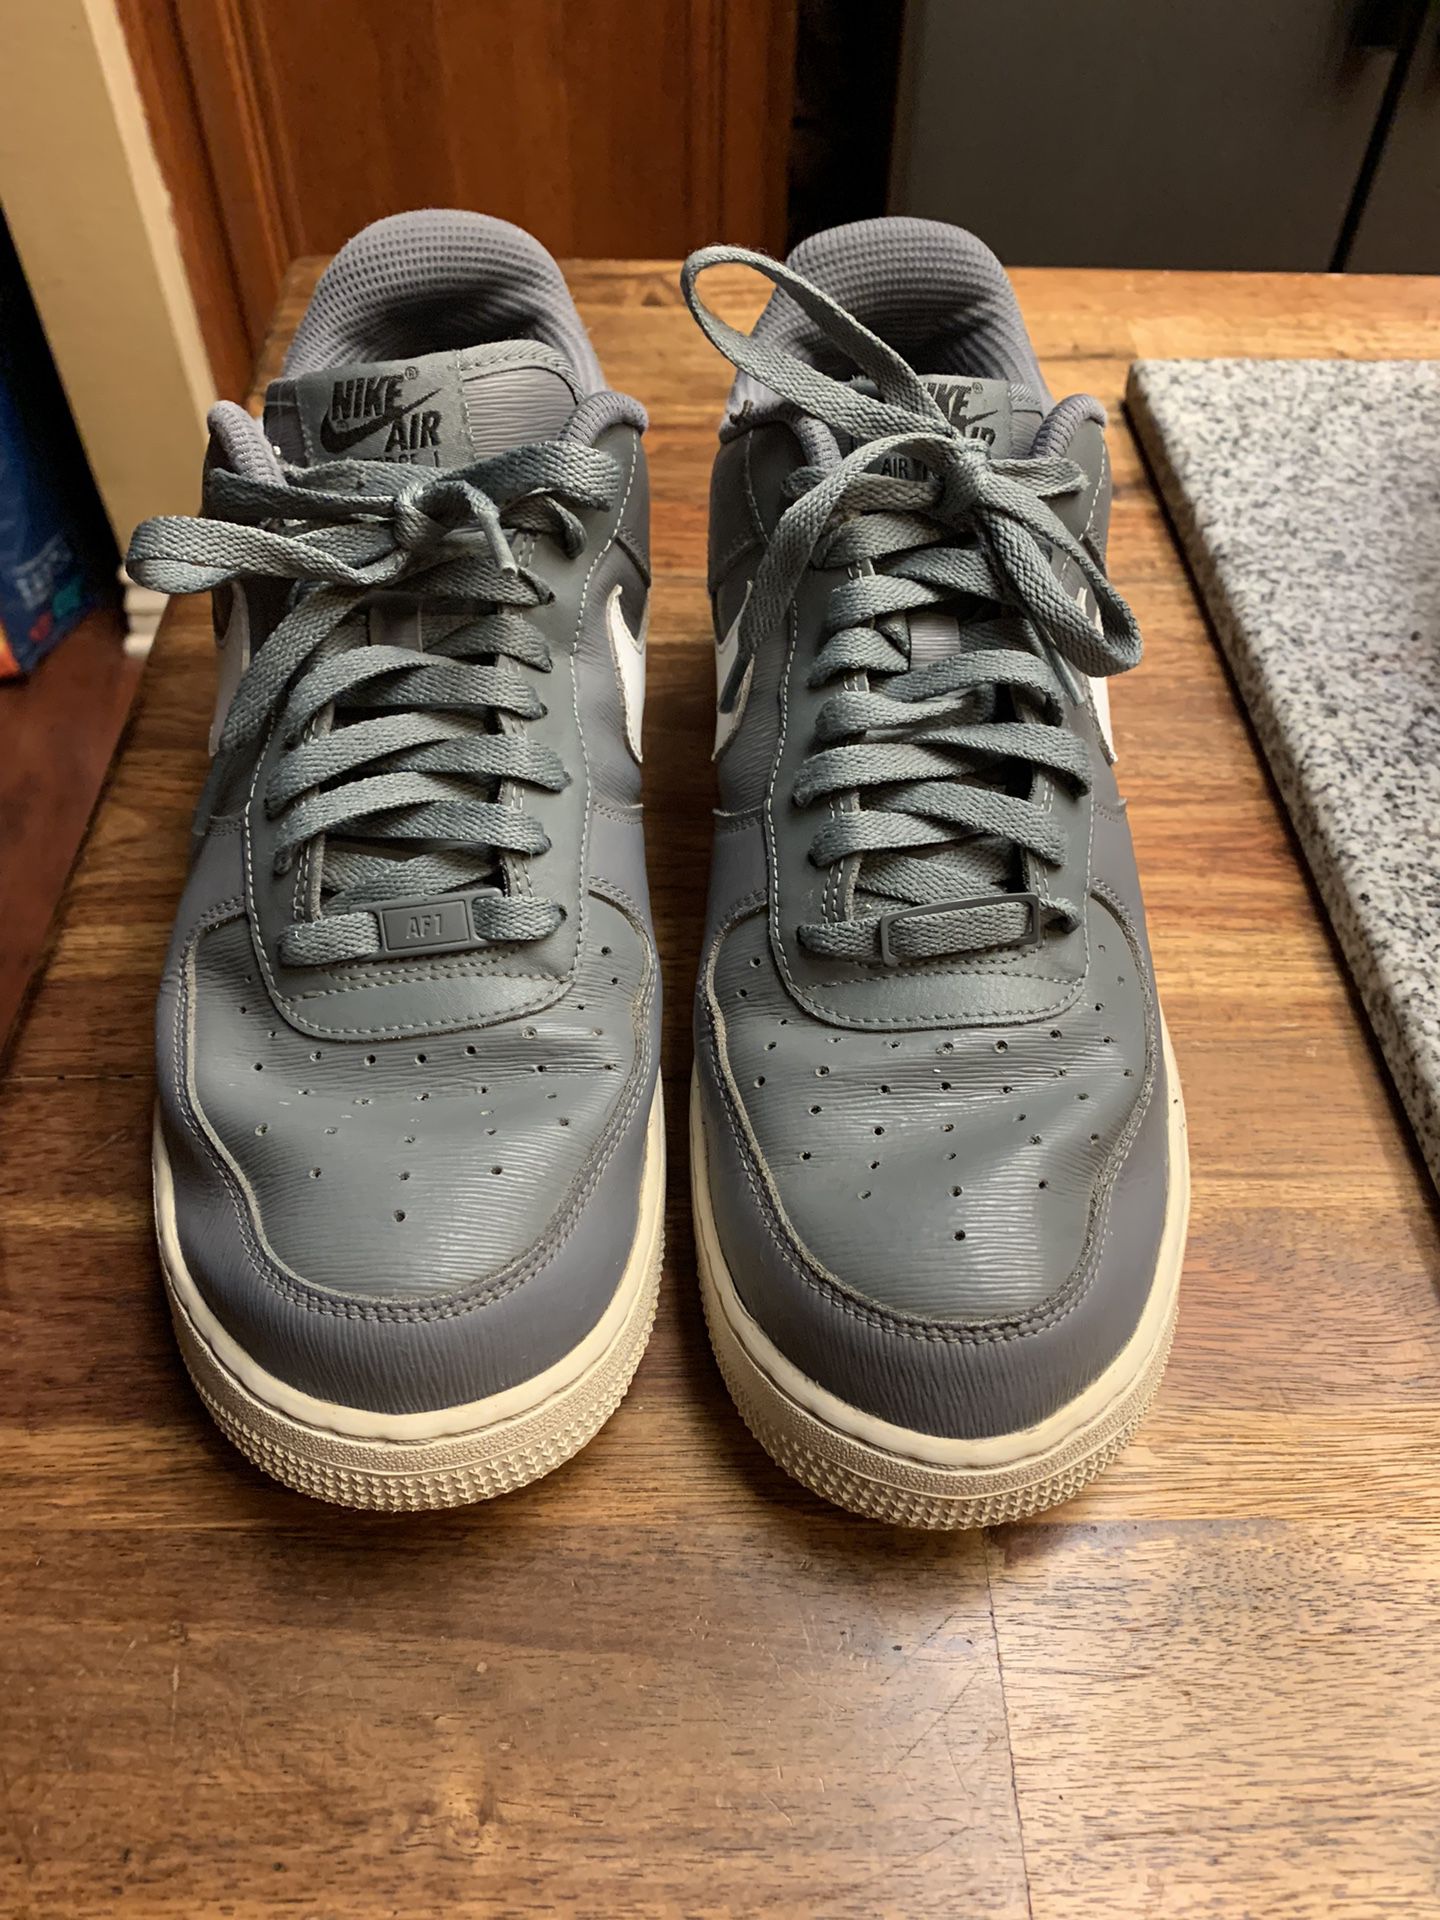 Men’s leather Nike air, one tennis shoes, size 10